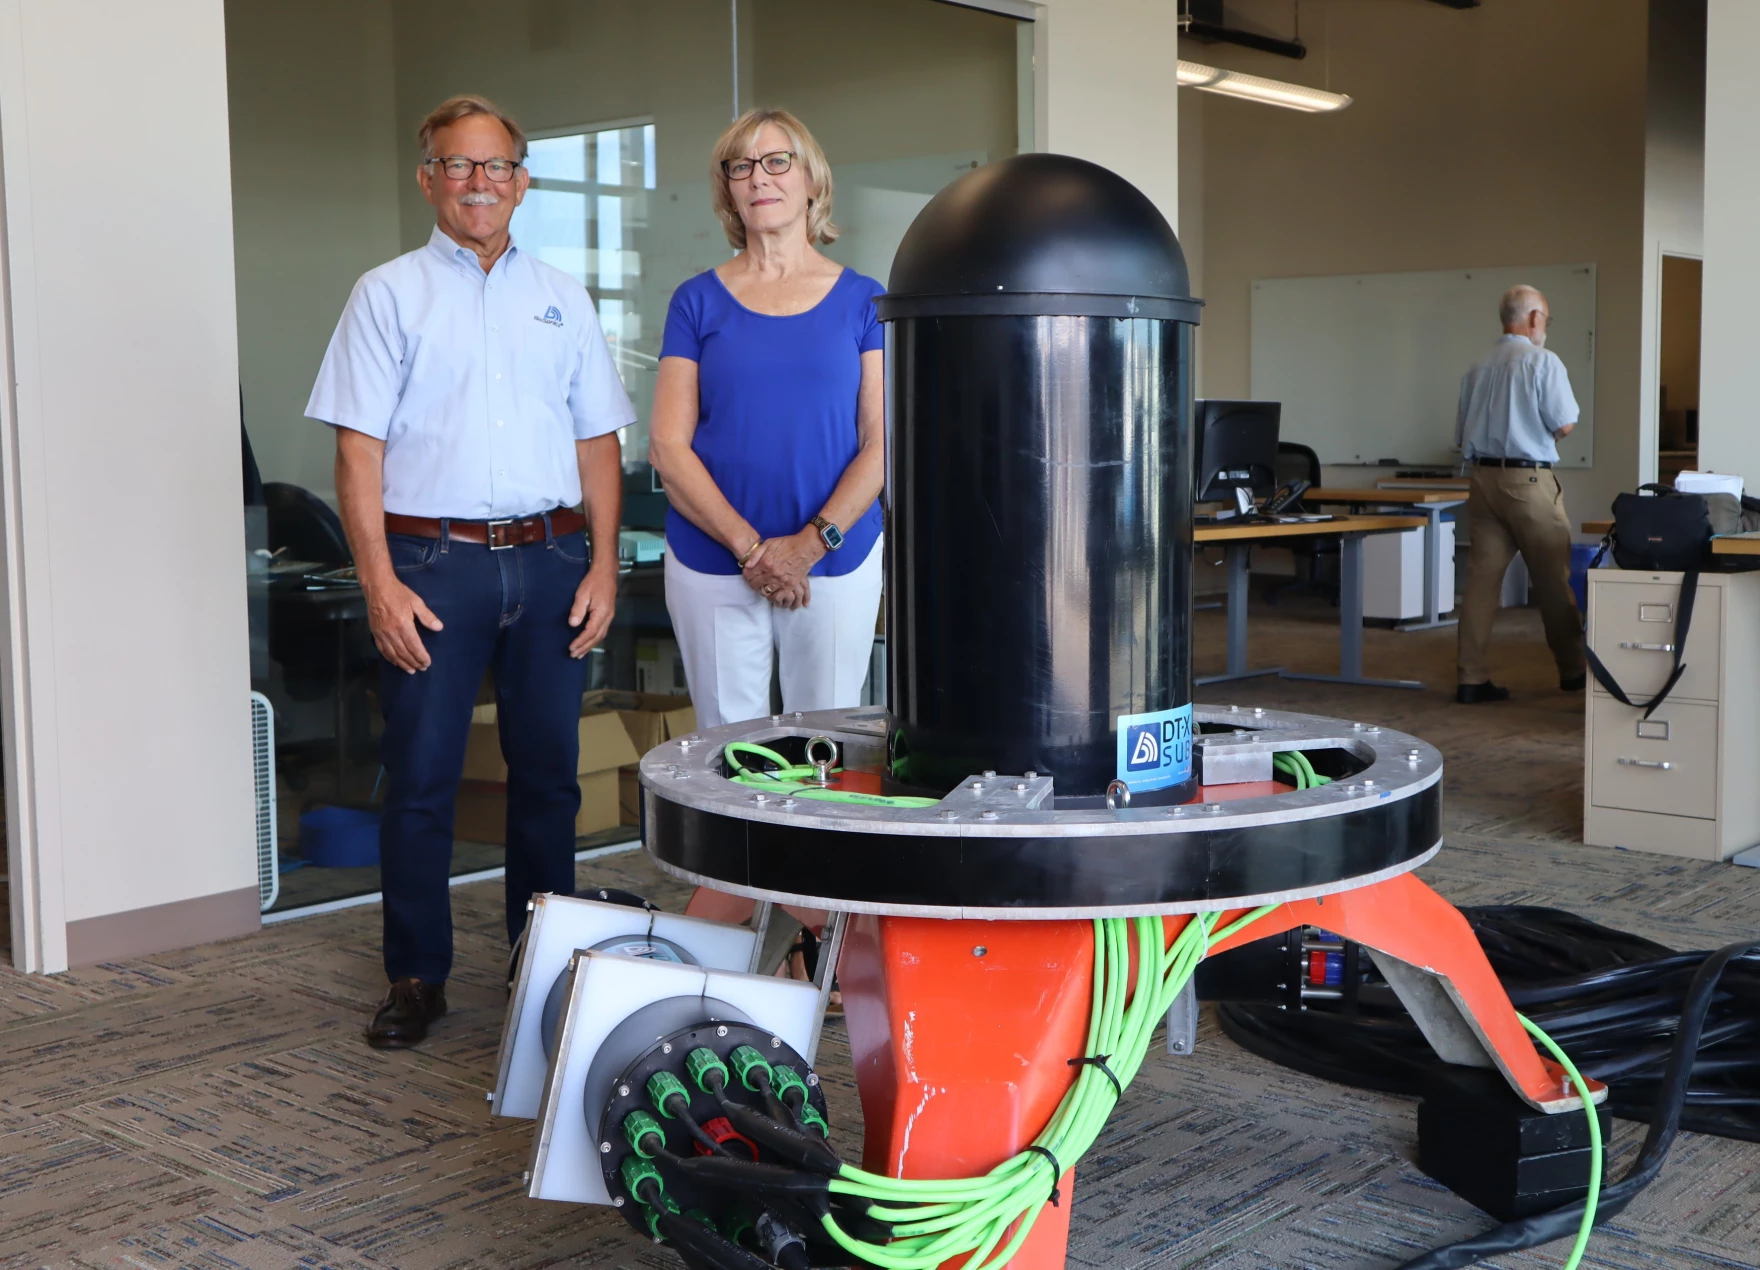 Tim and Bev Acker, CEO and CFO respectively of Biosonics, stand beside the Seattle company’s new ocean-bottom sonar device, which is designed to facilitate marine energy permitting by identifying and tracking nearby sea life.